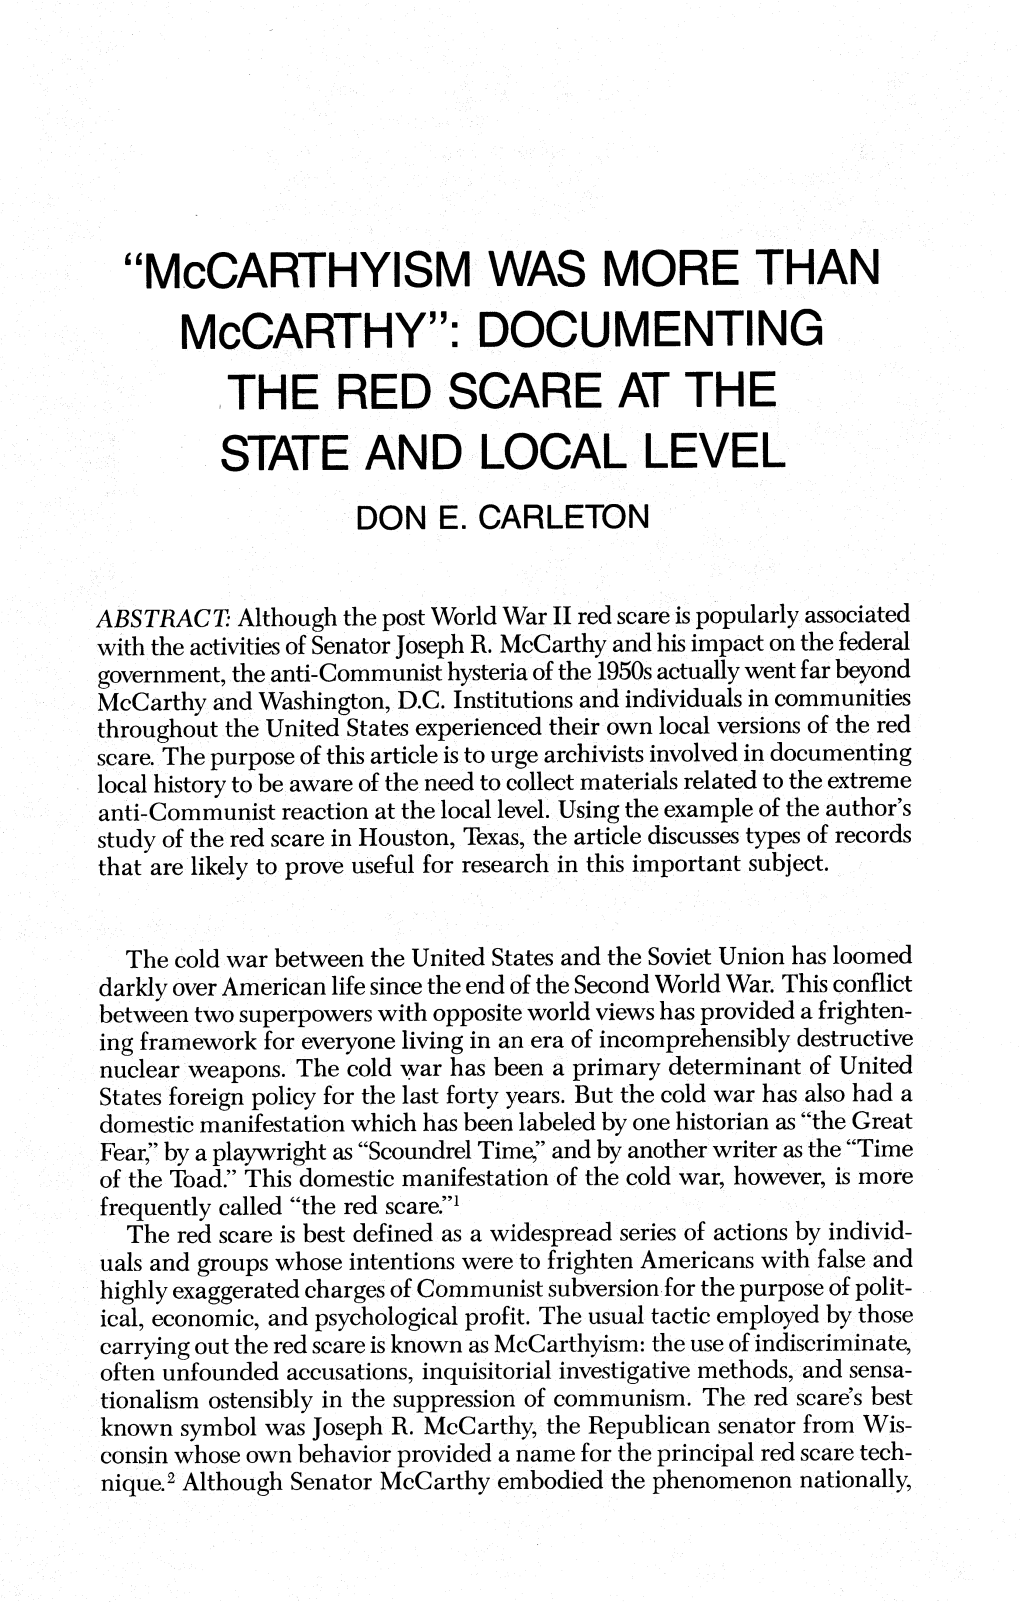 "Mccarthyism WAS MORE THAN Mccarthy": DOCUMENTING the RED SCARE at the STATE and LOCAL LEVEL DON E